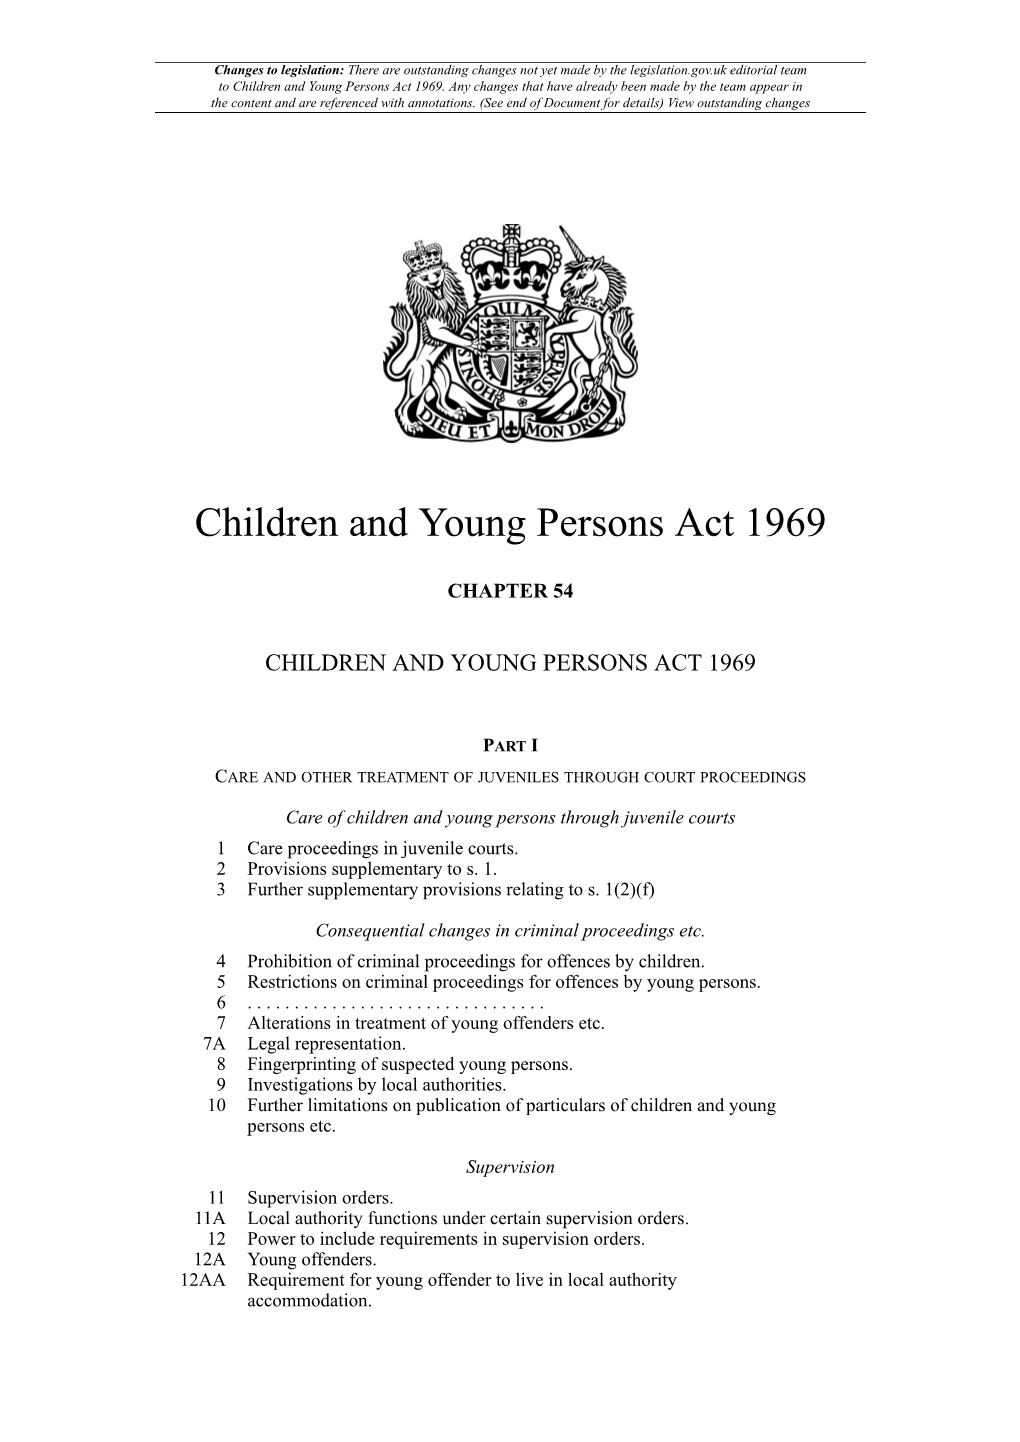 Children and Young Persons Act 1969